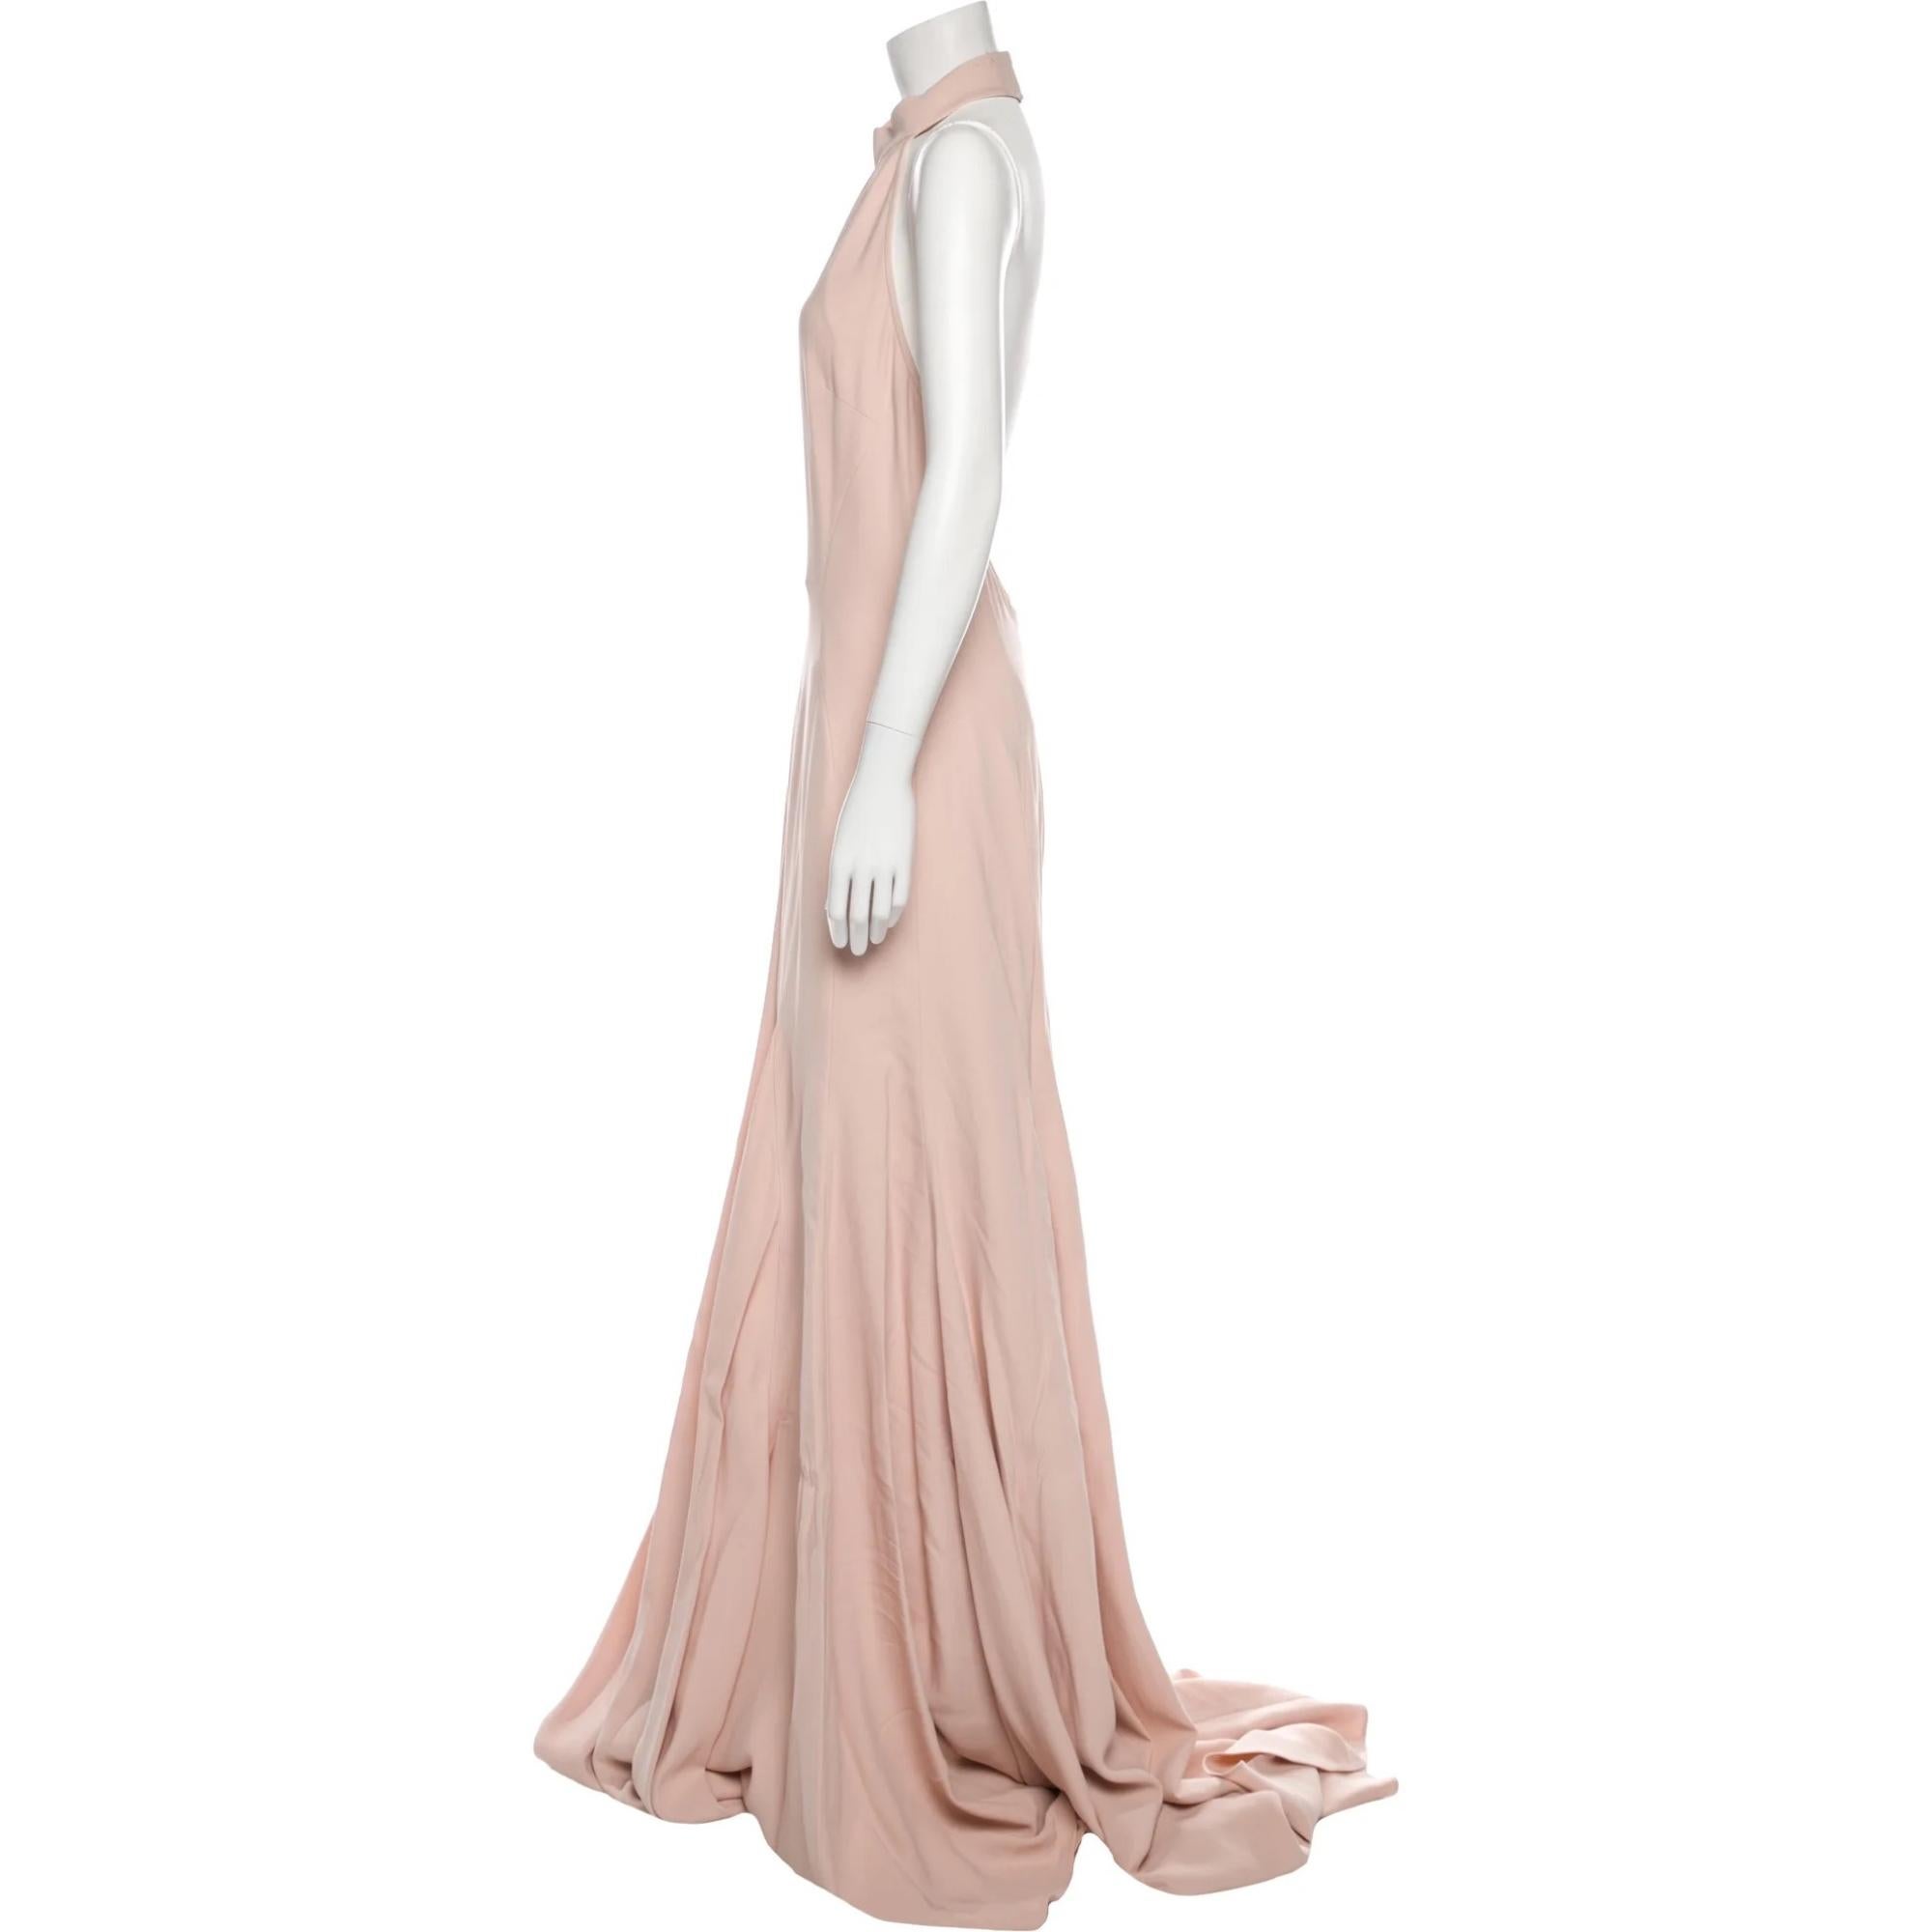 Stella McCartney Evening Gown. Pink. Ruffle Embellishment. Halterneck. Concealed Zip Closure at Back. Designer Fit: Dresses by Stella McCartney typically fit true to size.

Color: Light pink
Material: 64% Viscose, 32% Acetate, 4% Elastane
Condition: